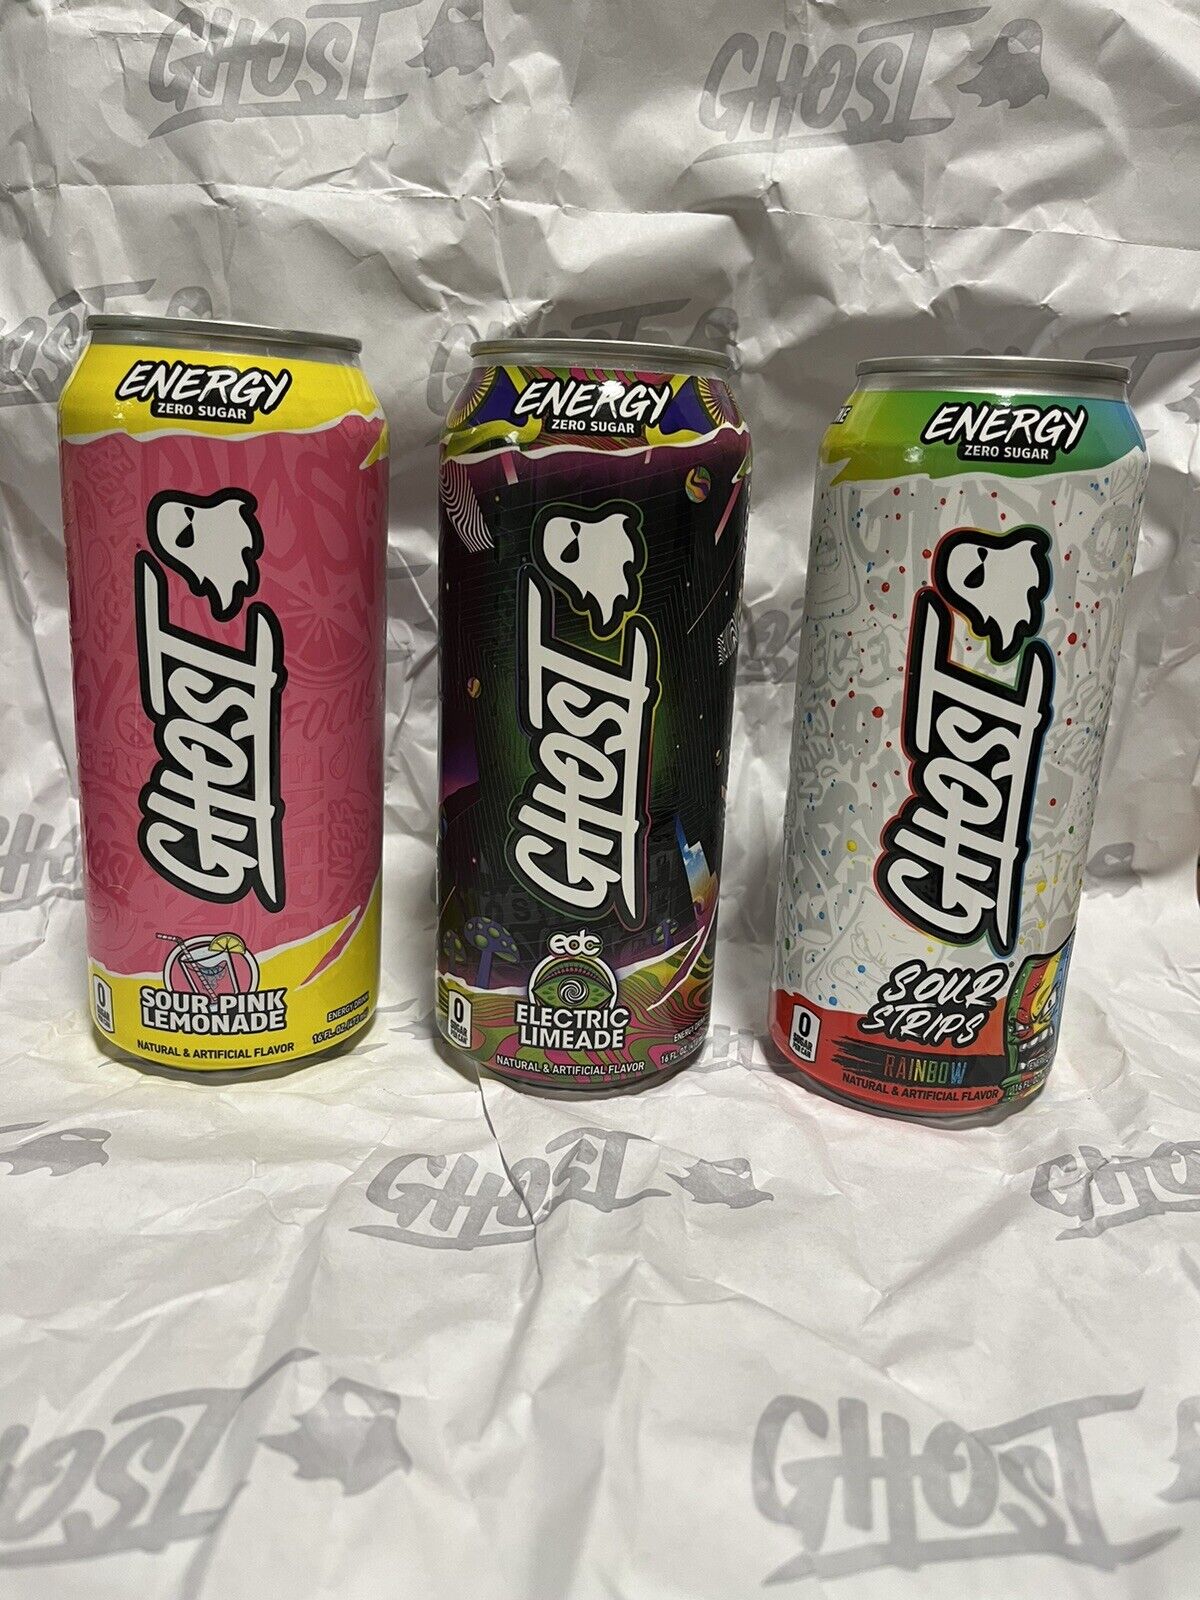 Ghost Energy - Rare Energy Drink Variety Pack-3 CANS (sealed & unopened)